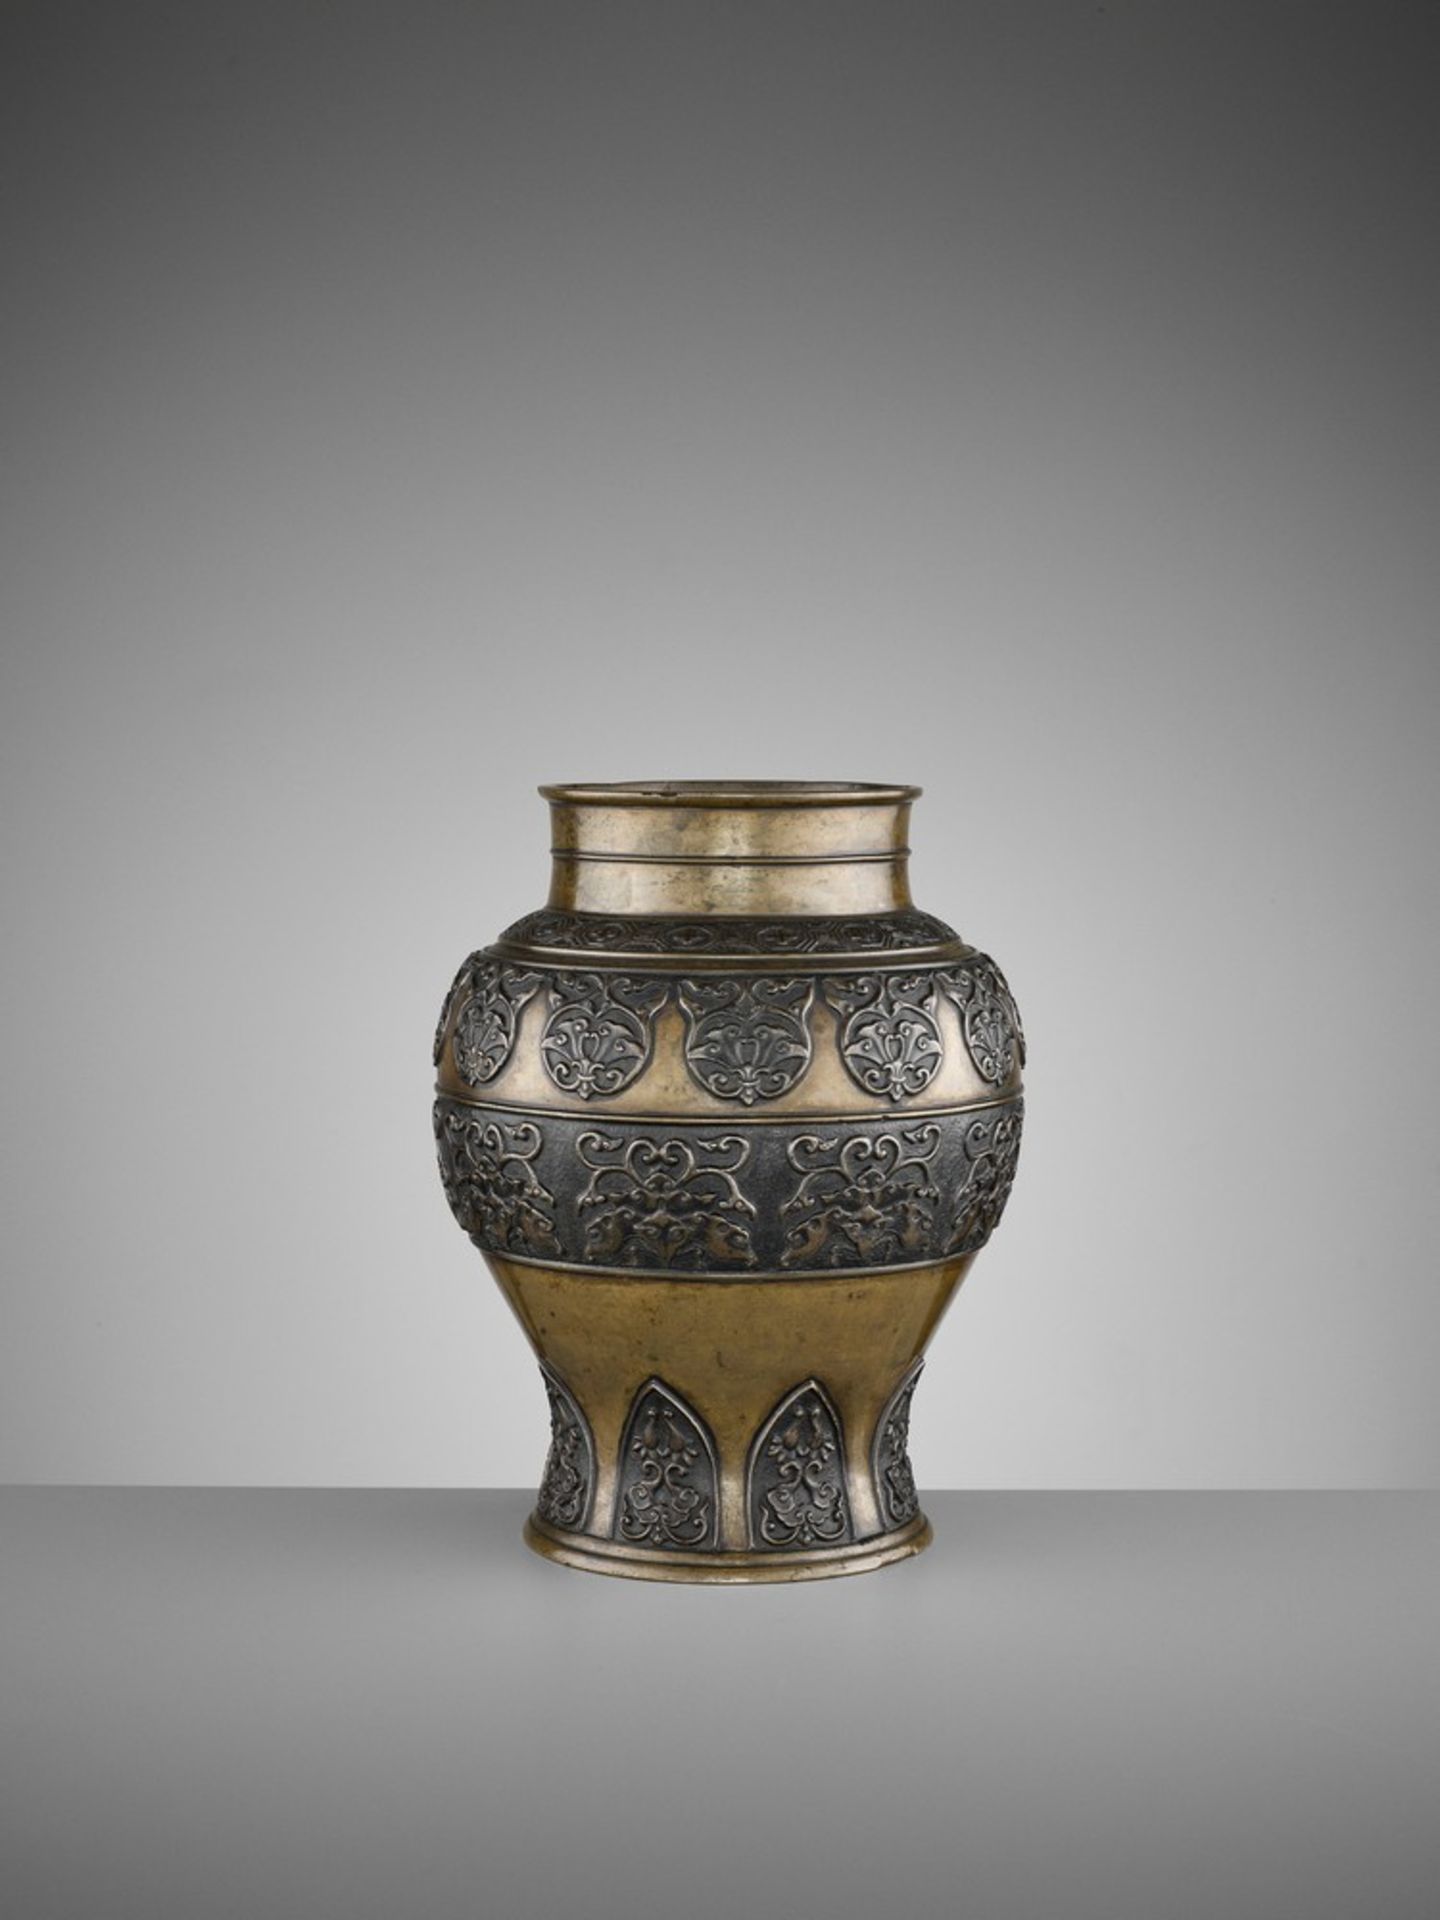 AN ARCHAISTIC BRONZE BALUSTER VASE, 17TH CENTURY - Image 6 of 8